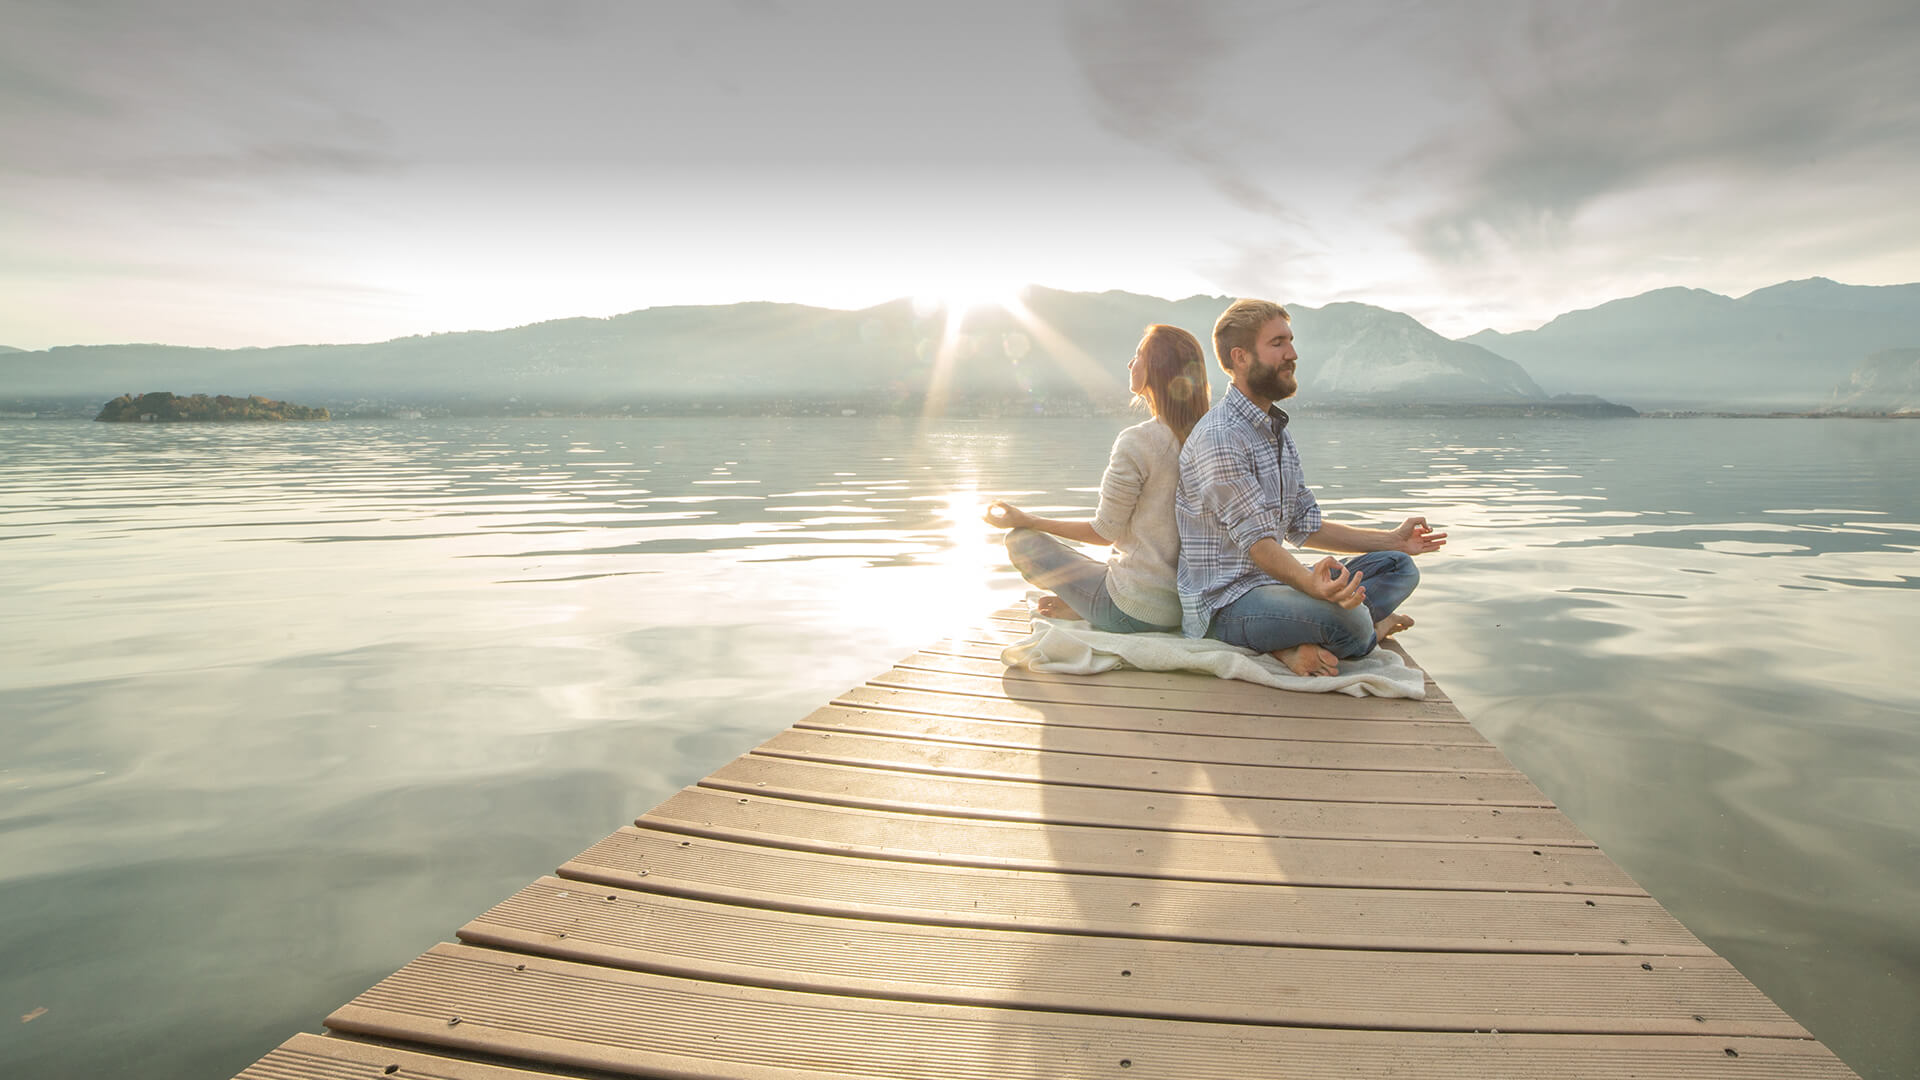 Spiritual dating symbolized by a couple meditating together on a dock